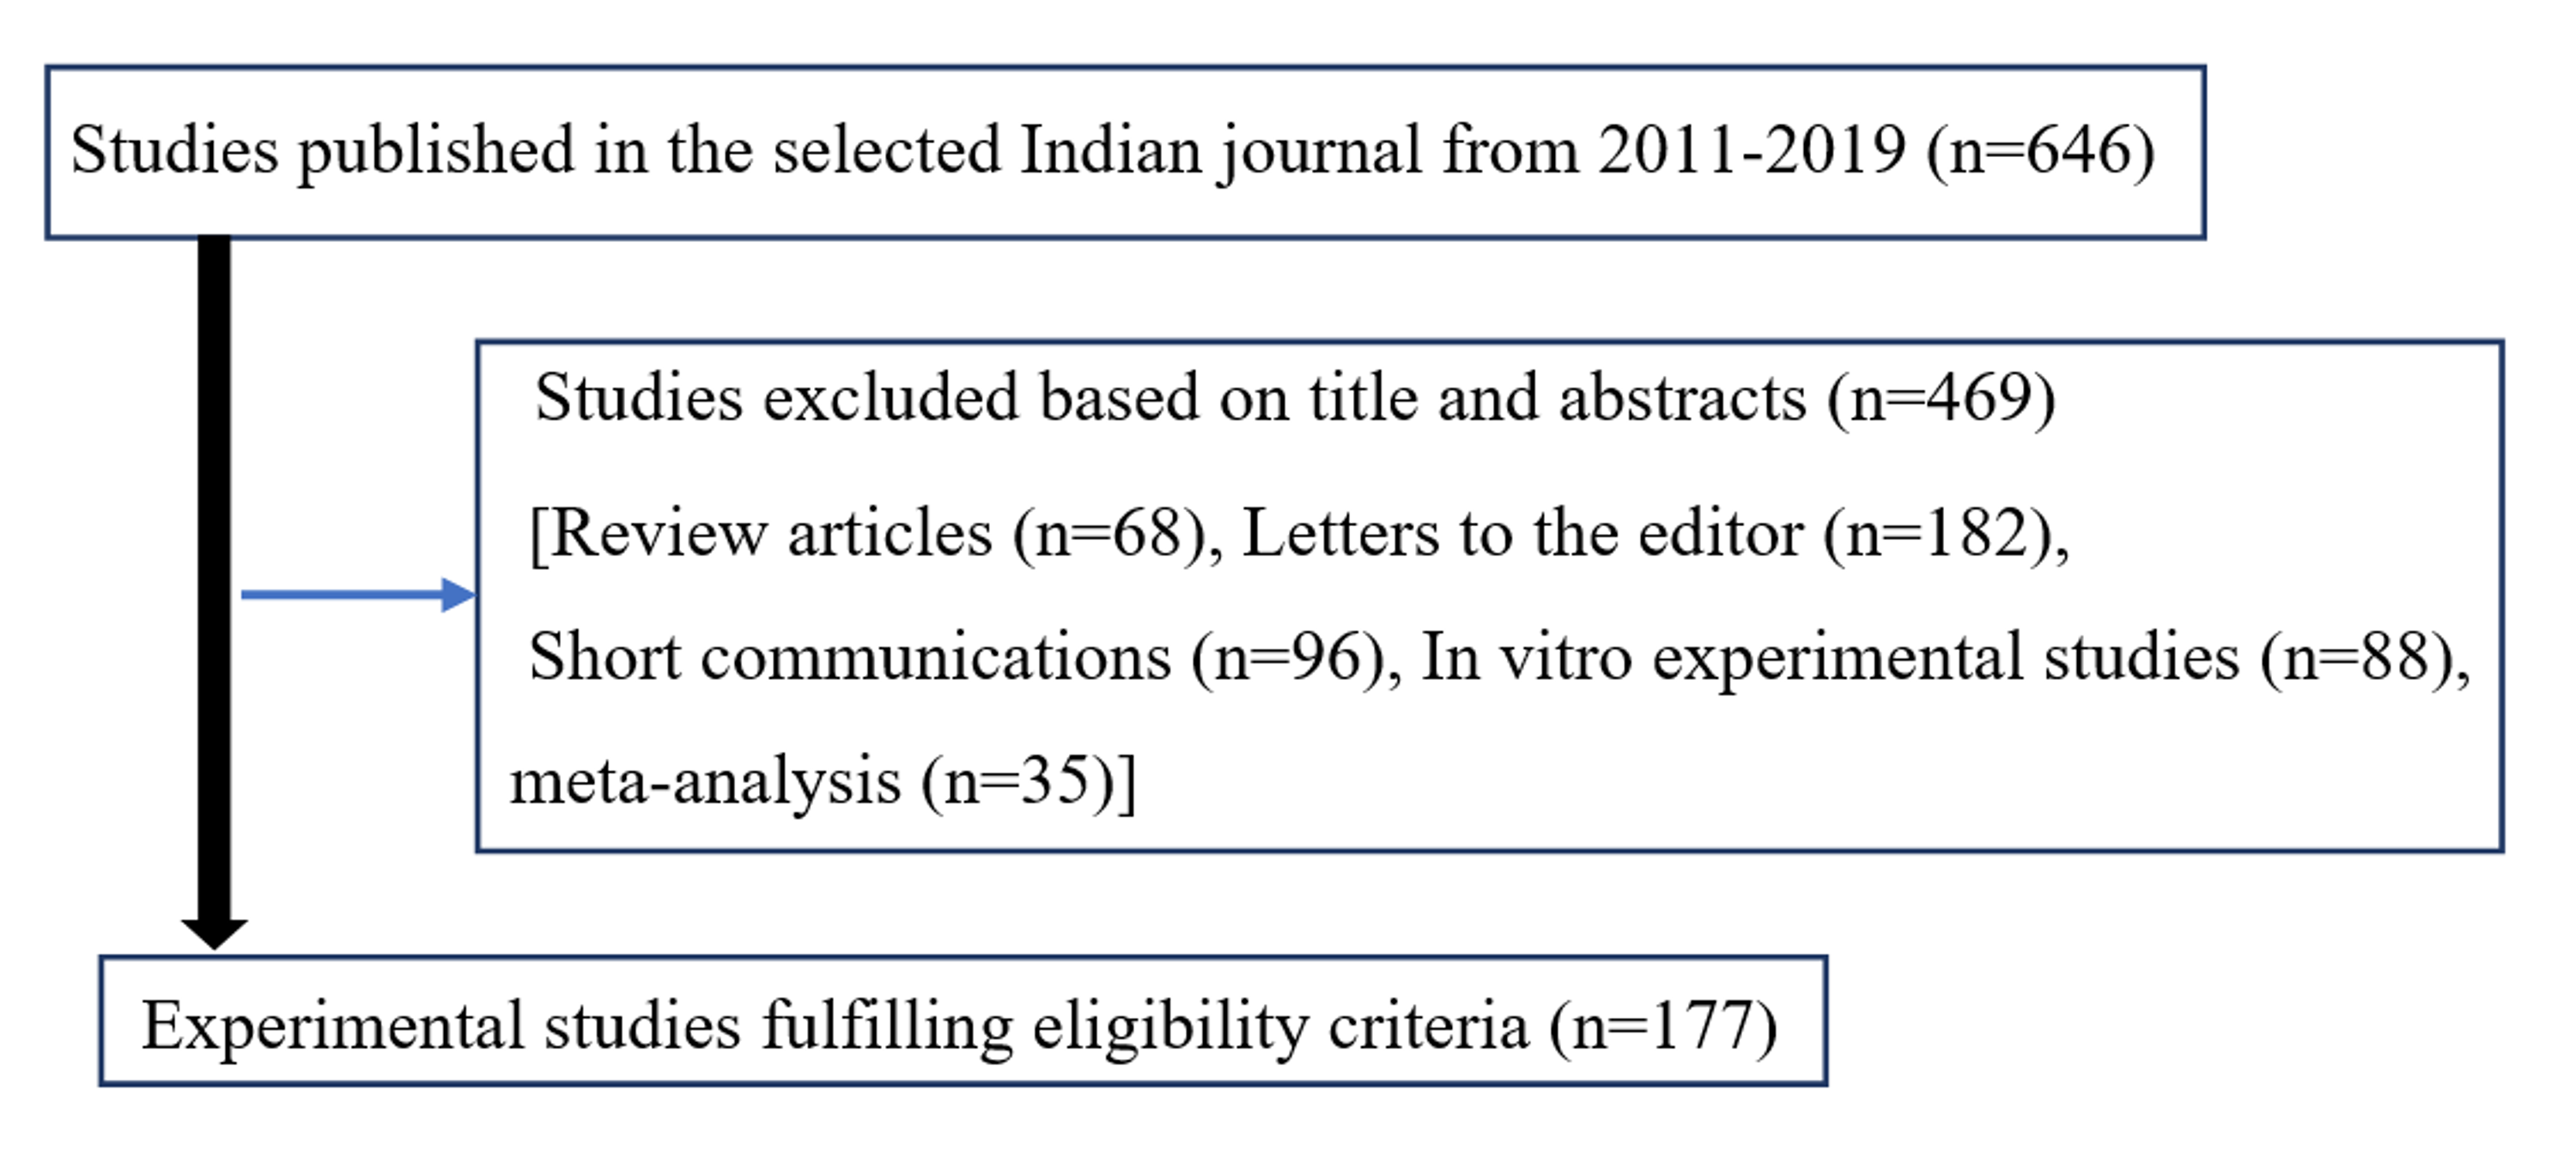 Cureus | A Study to Assess the Quality of Reporting of Animal Research  Studies Published in PubMed Indexed Journals: A Retrospective,  Cross-Sectional Content Analysis | Article